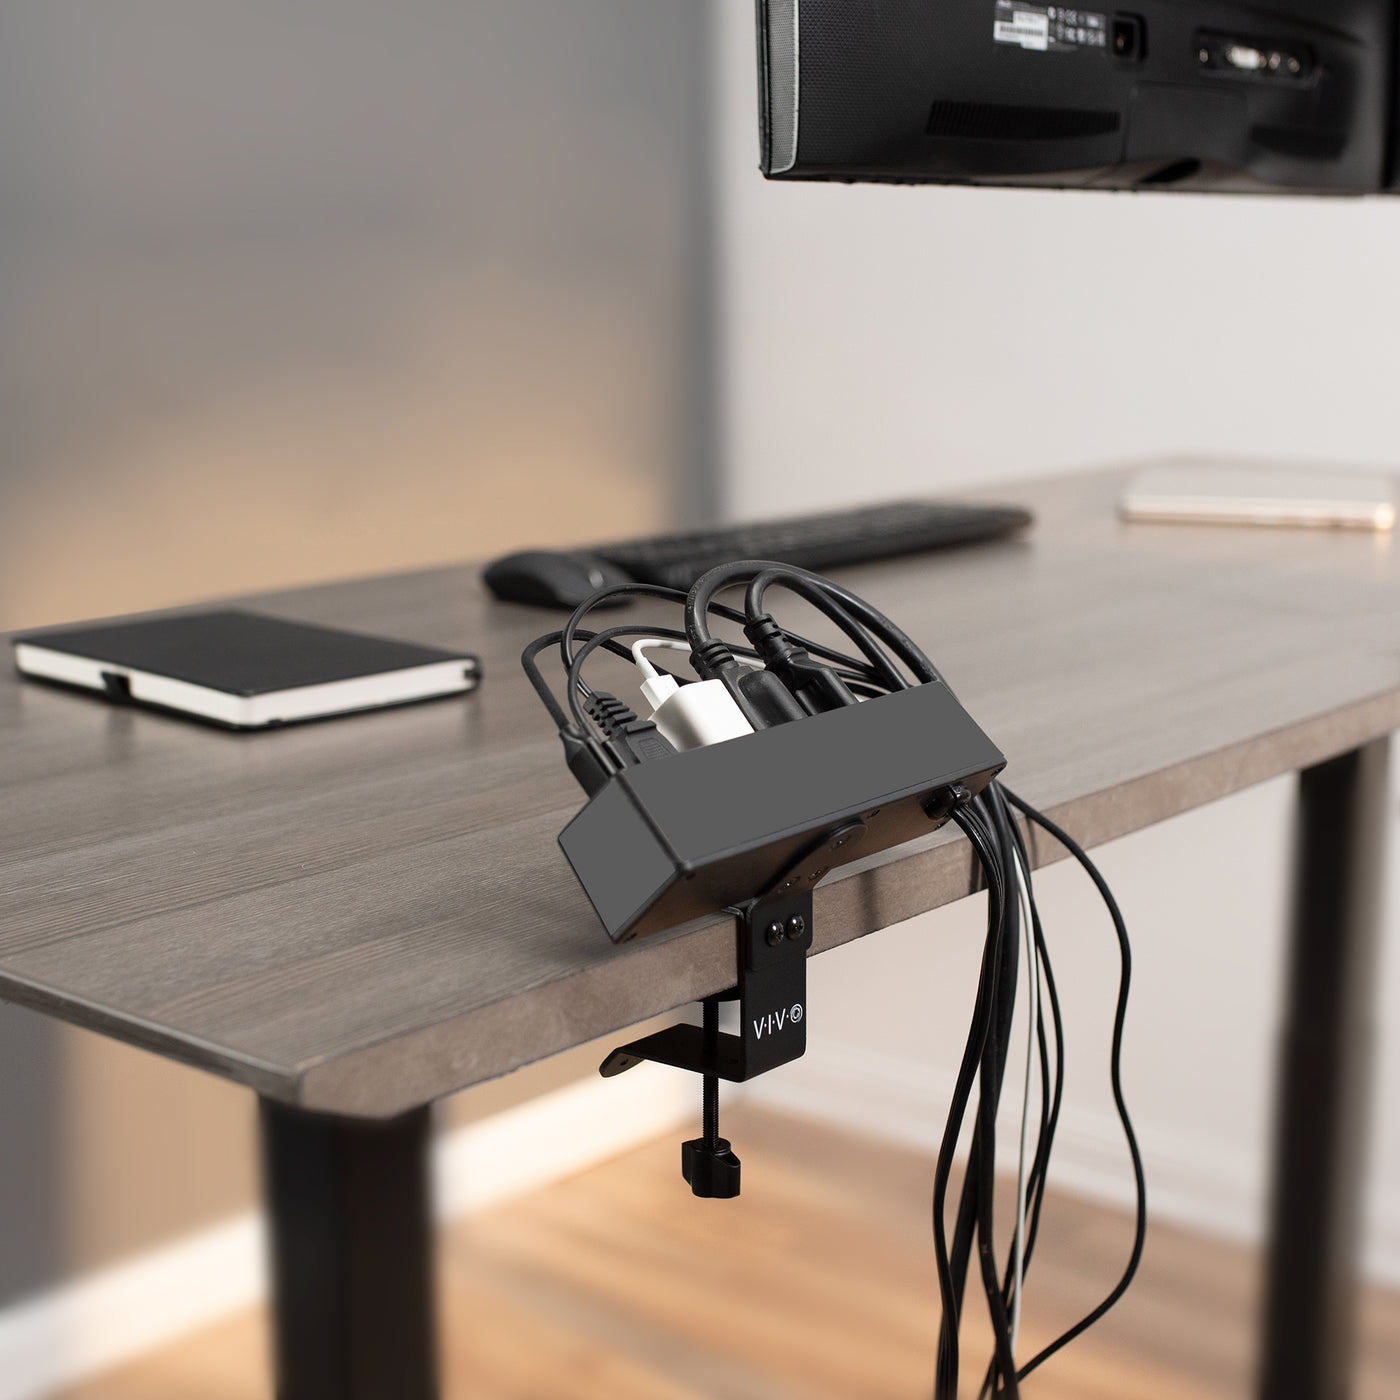 Power strip clamped to the back of a desk for easy cord access and management.